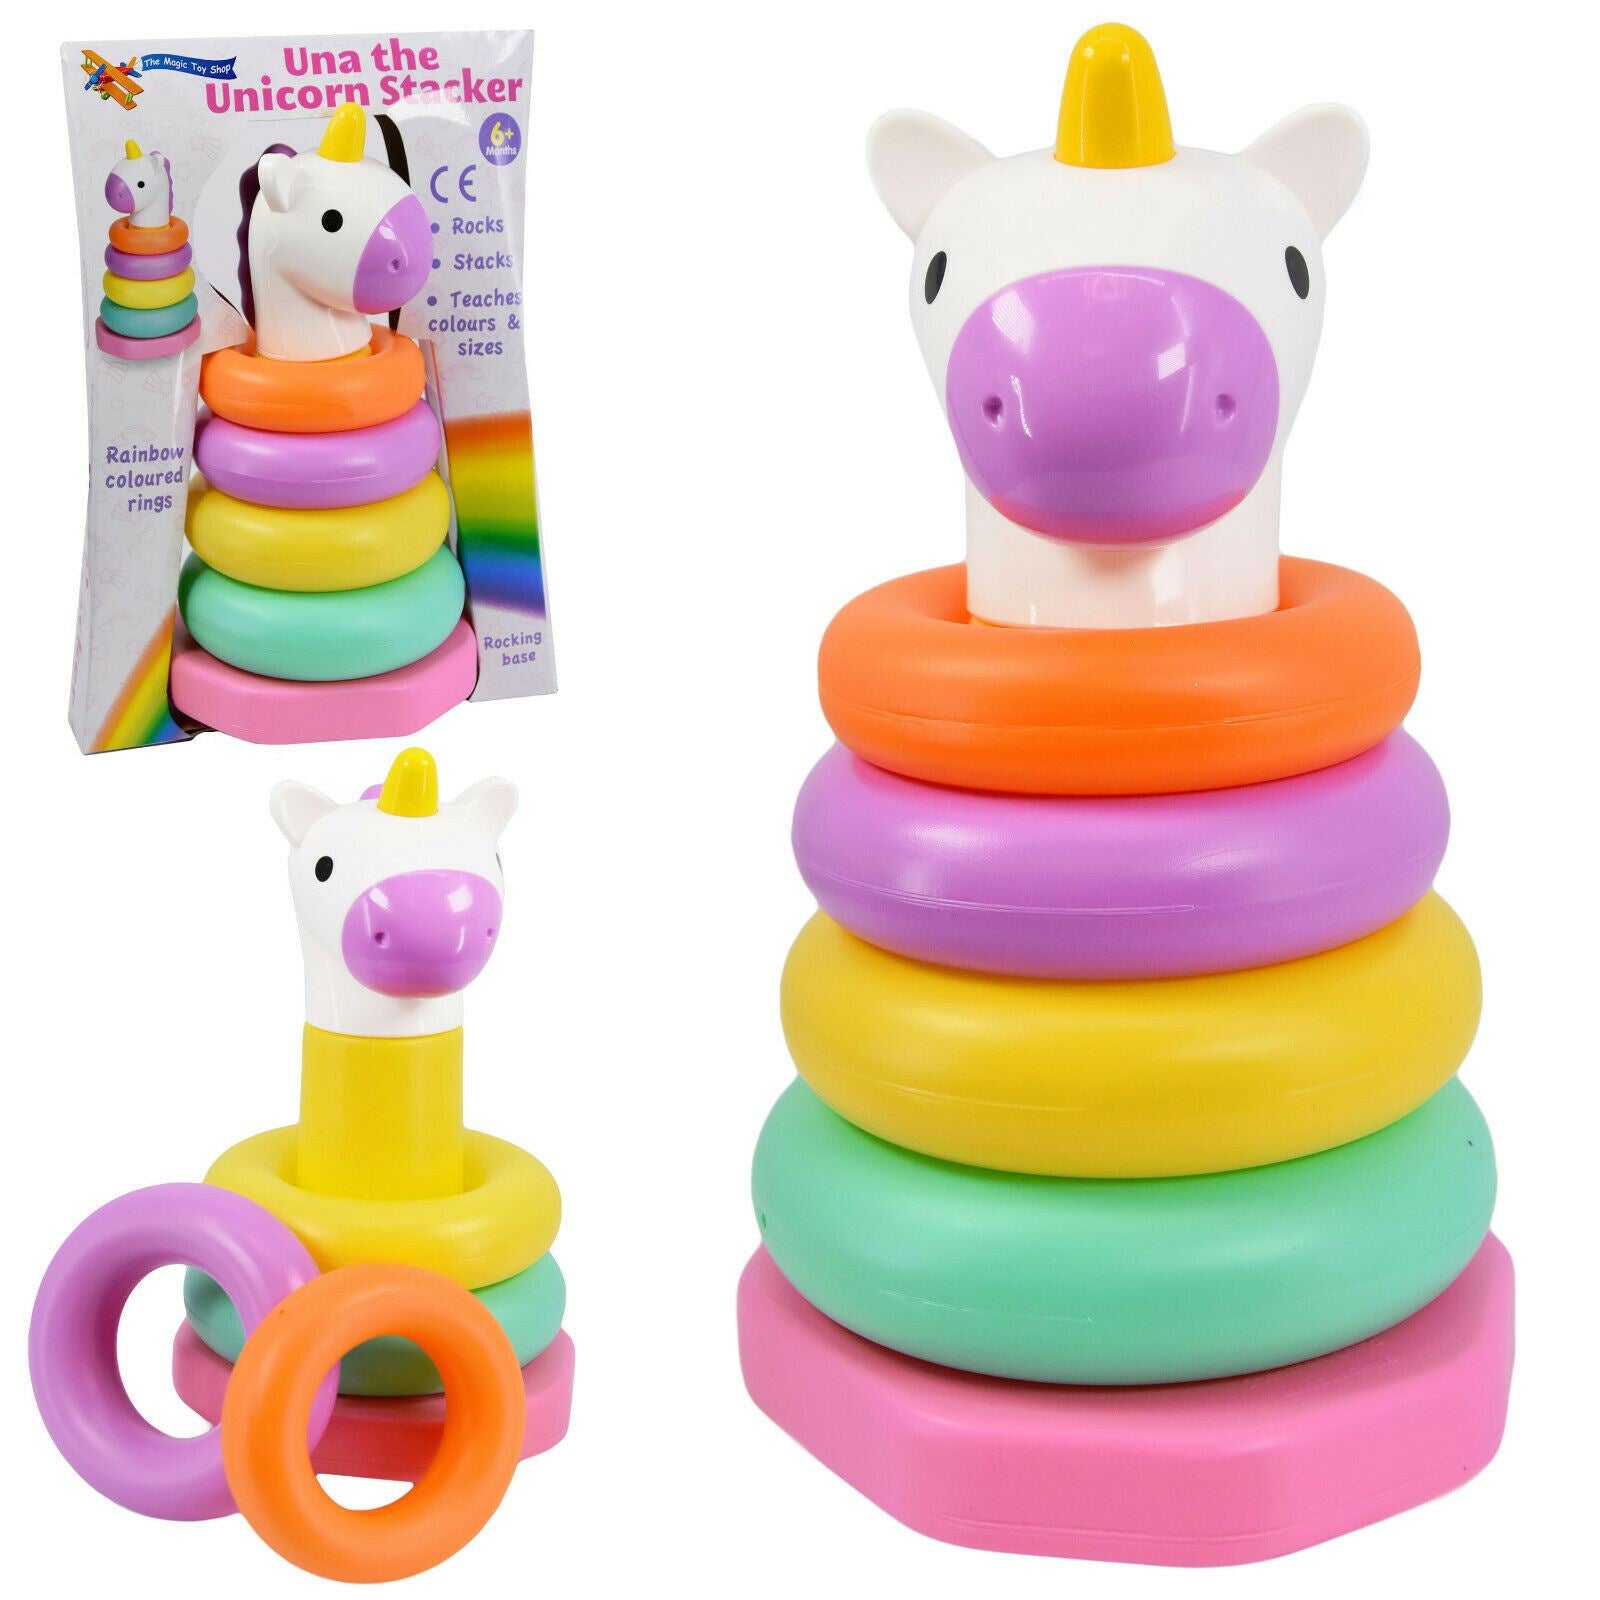 "Una The Unicorn" Baby Stacking Rings by The Magic Toy Shop - The Magic Toy Shop